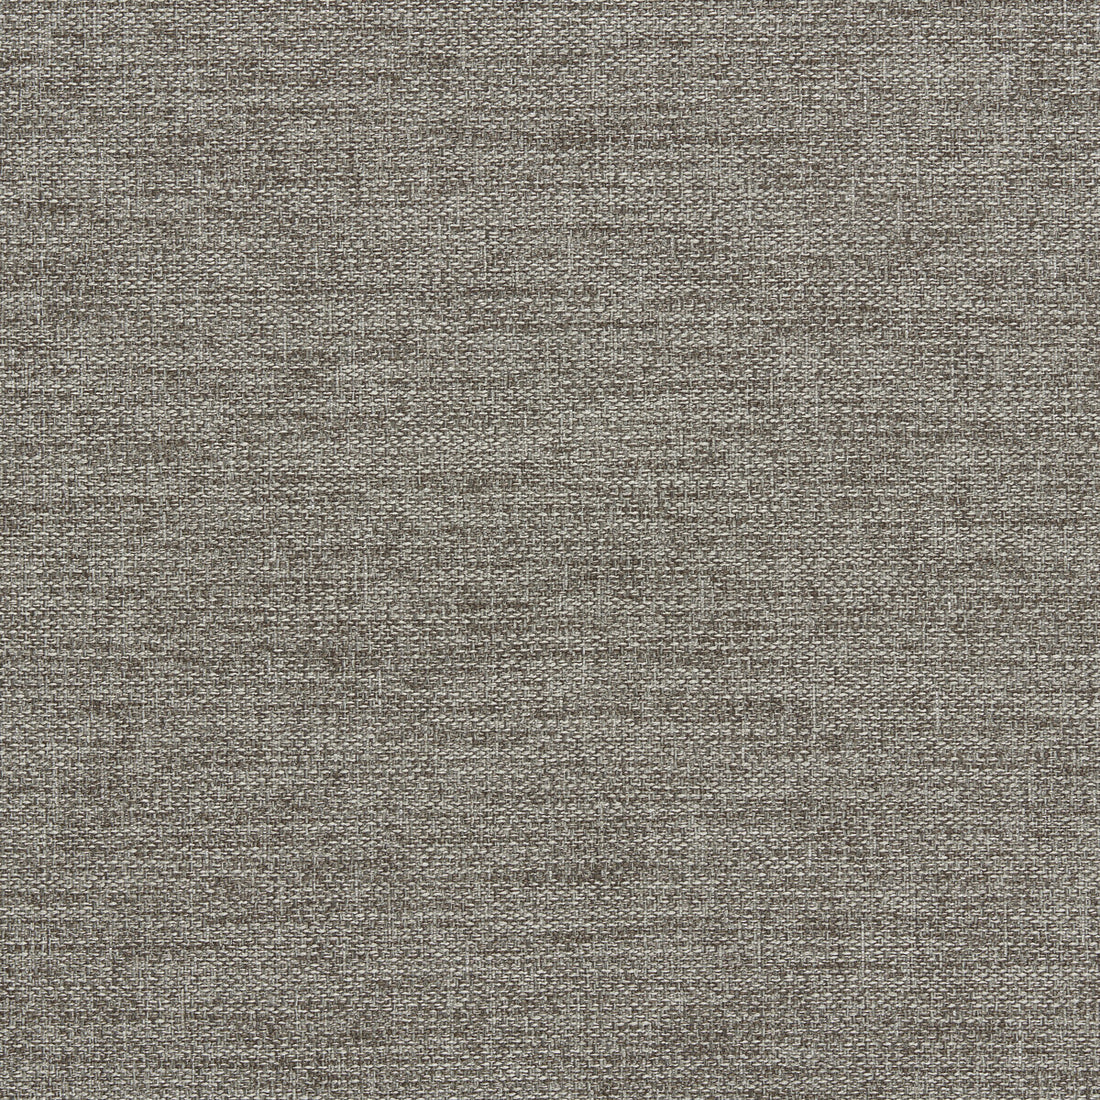 Llanara fabric in mink color - pattern F1422/06.CAC.0 - by Clarke And Clarke in the Clarke &amp; Clarke Purus collection